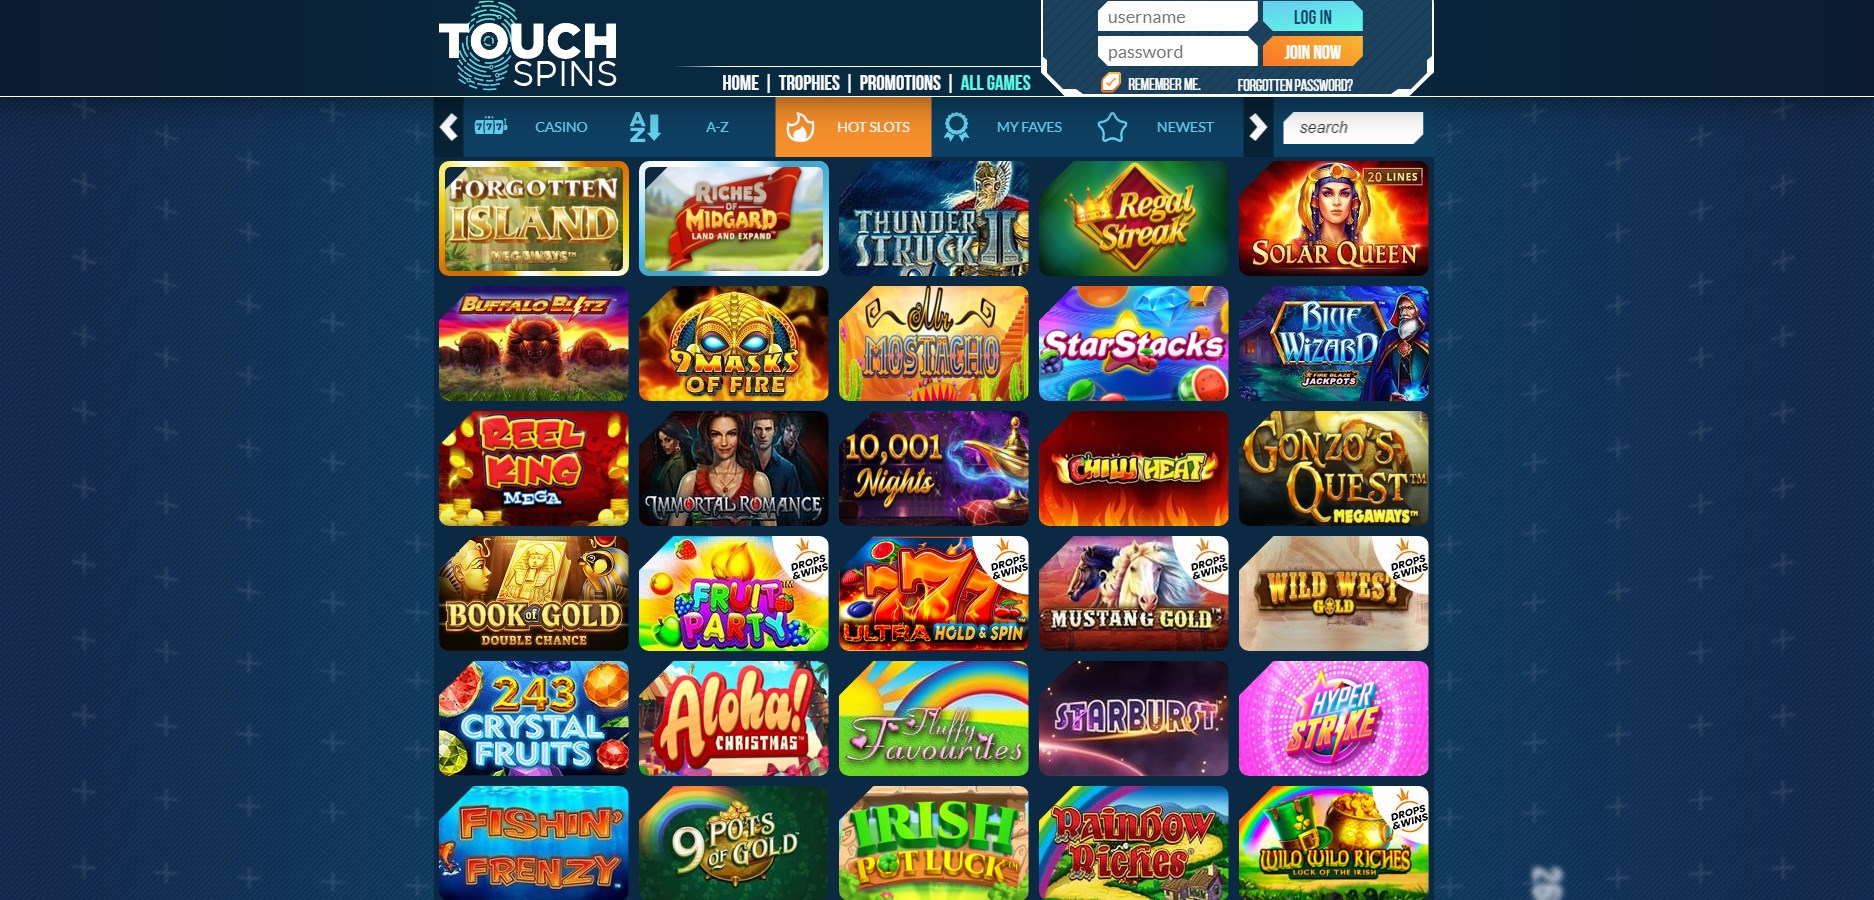 Touch Spins Casino Games